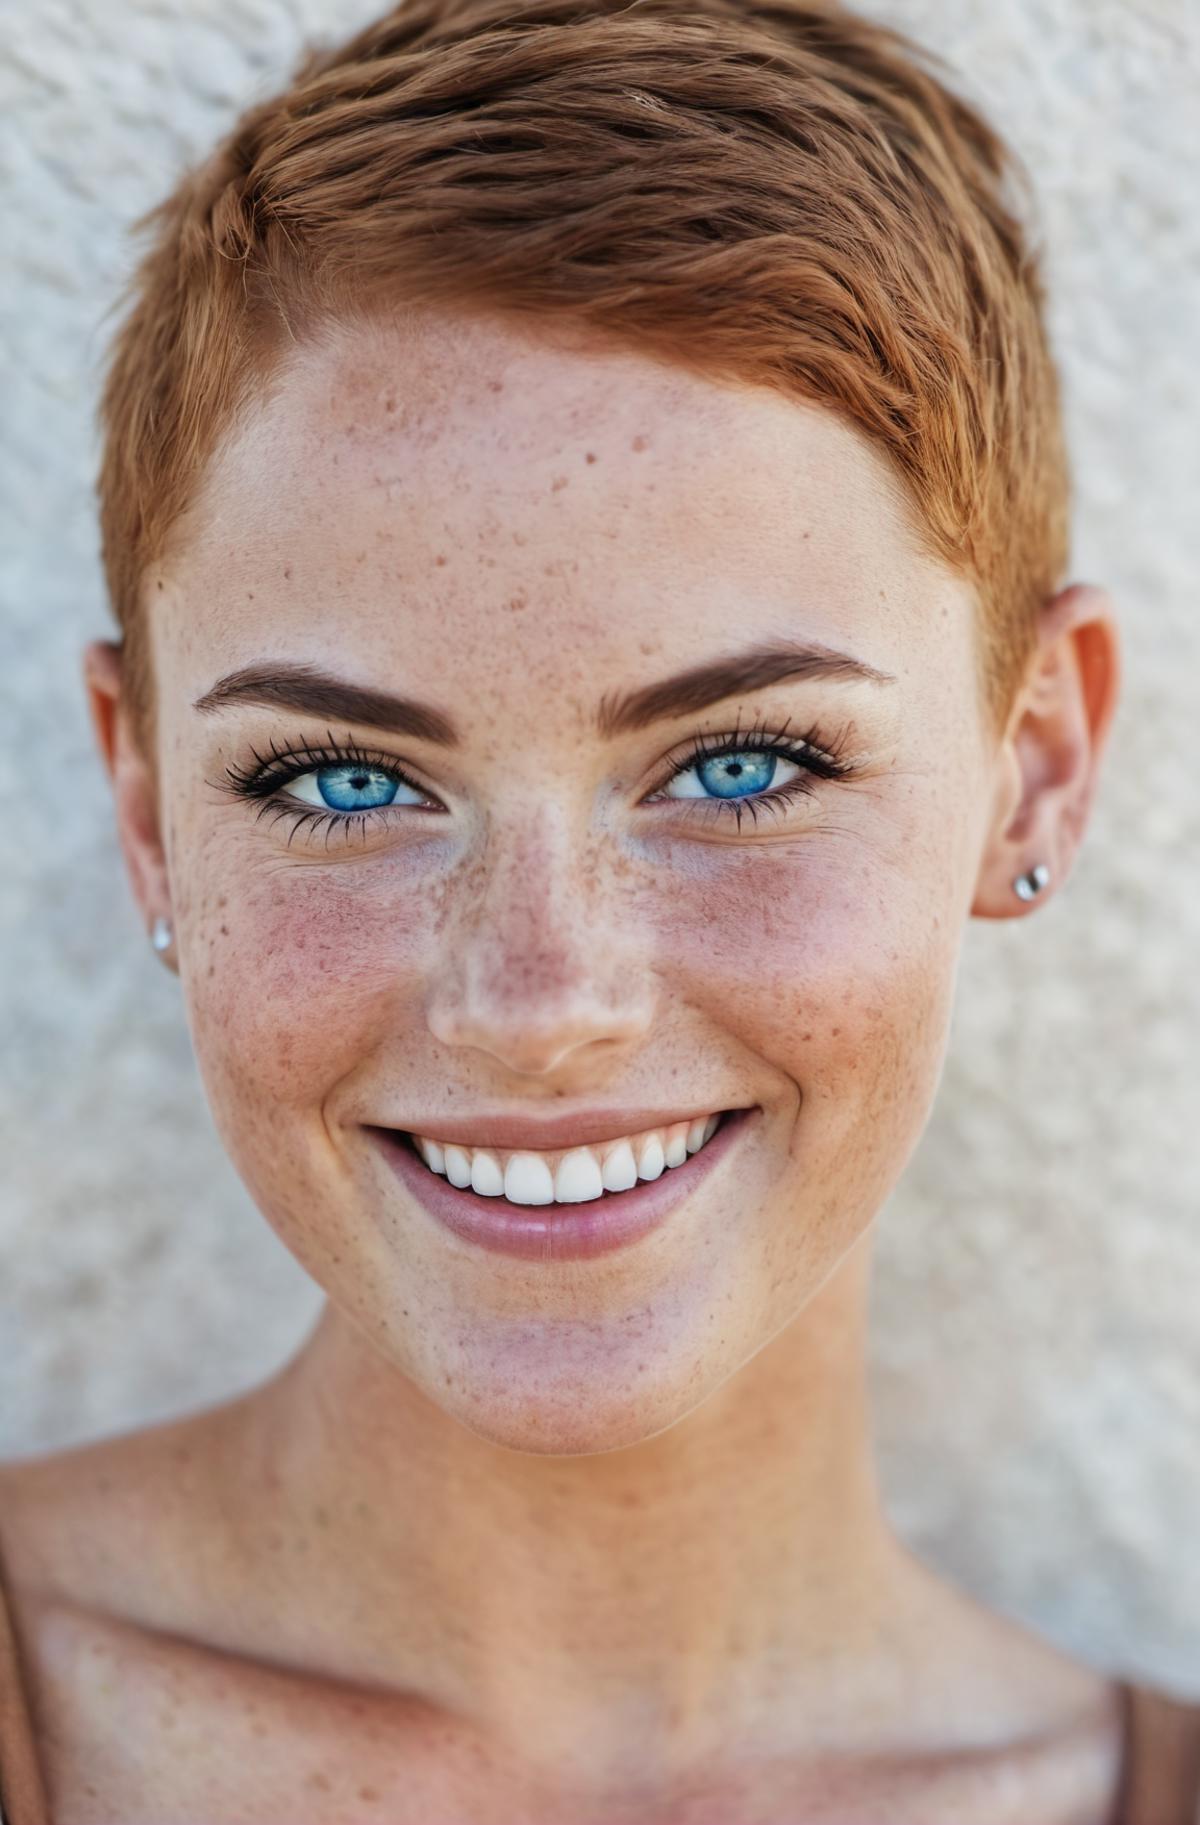 A smiling woman with blue eyes and red hair.